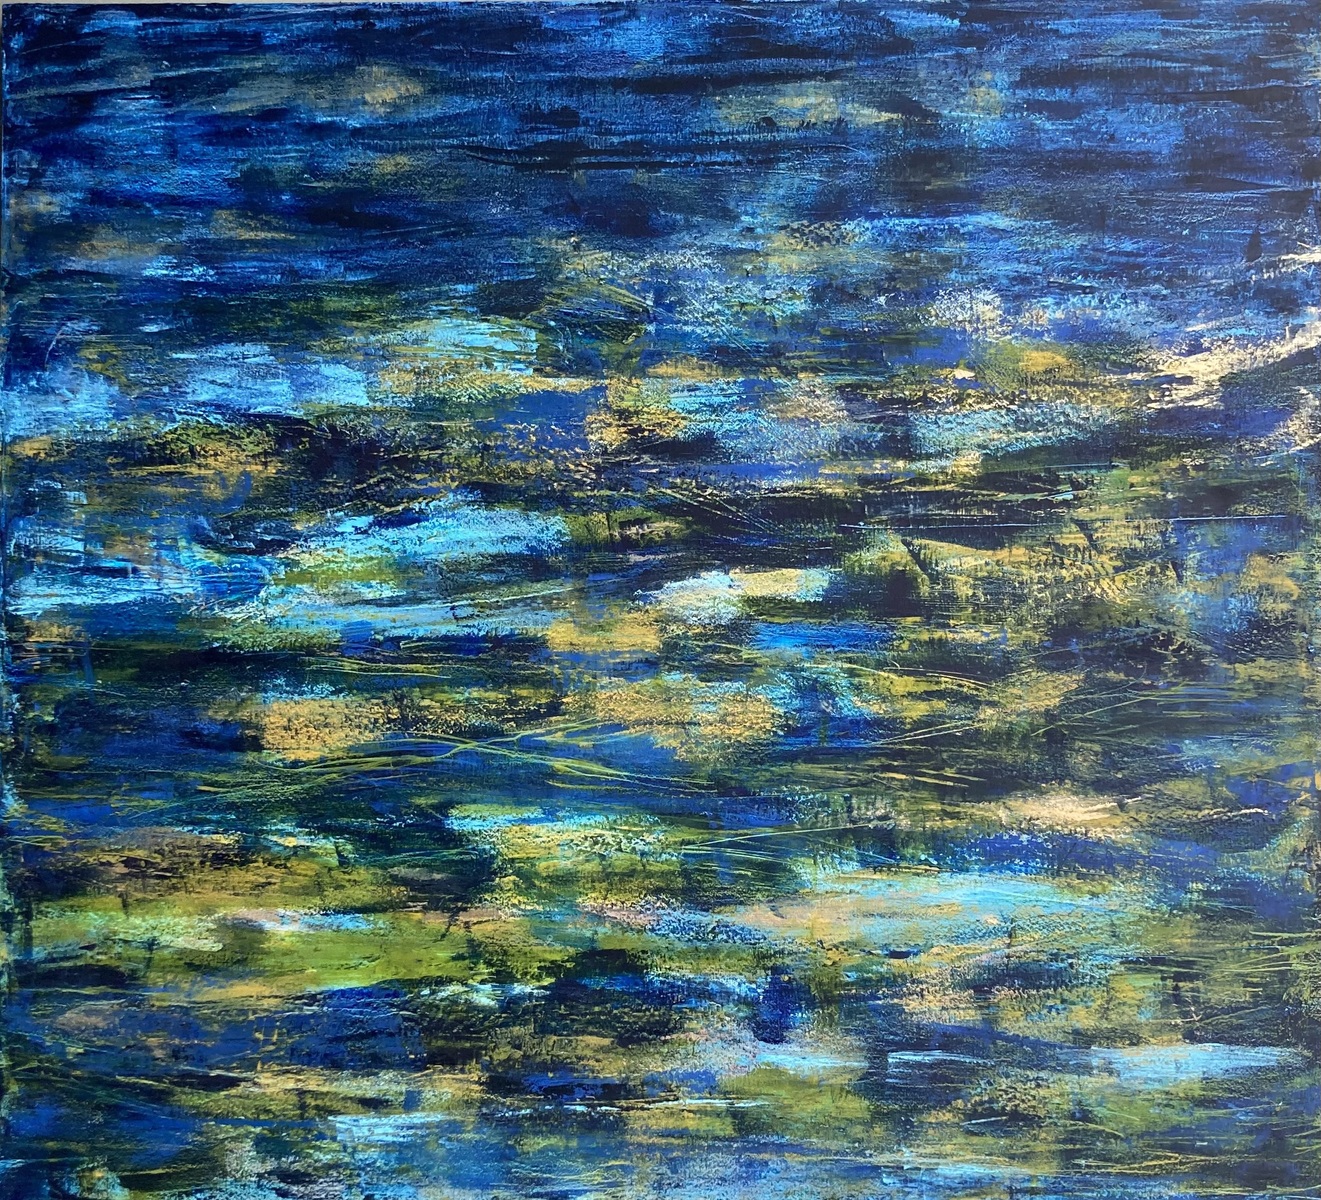 River Reflection, Galactic Blue - Reflections solo